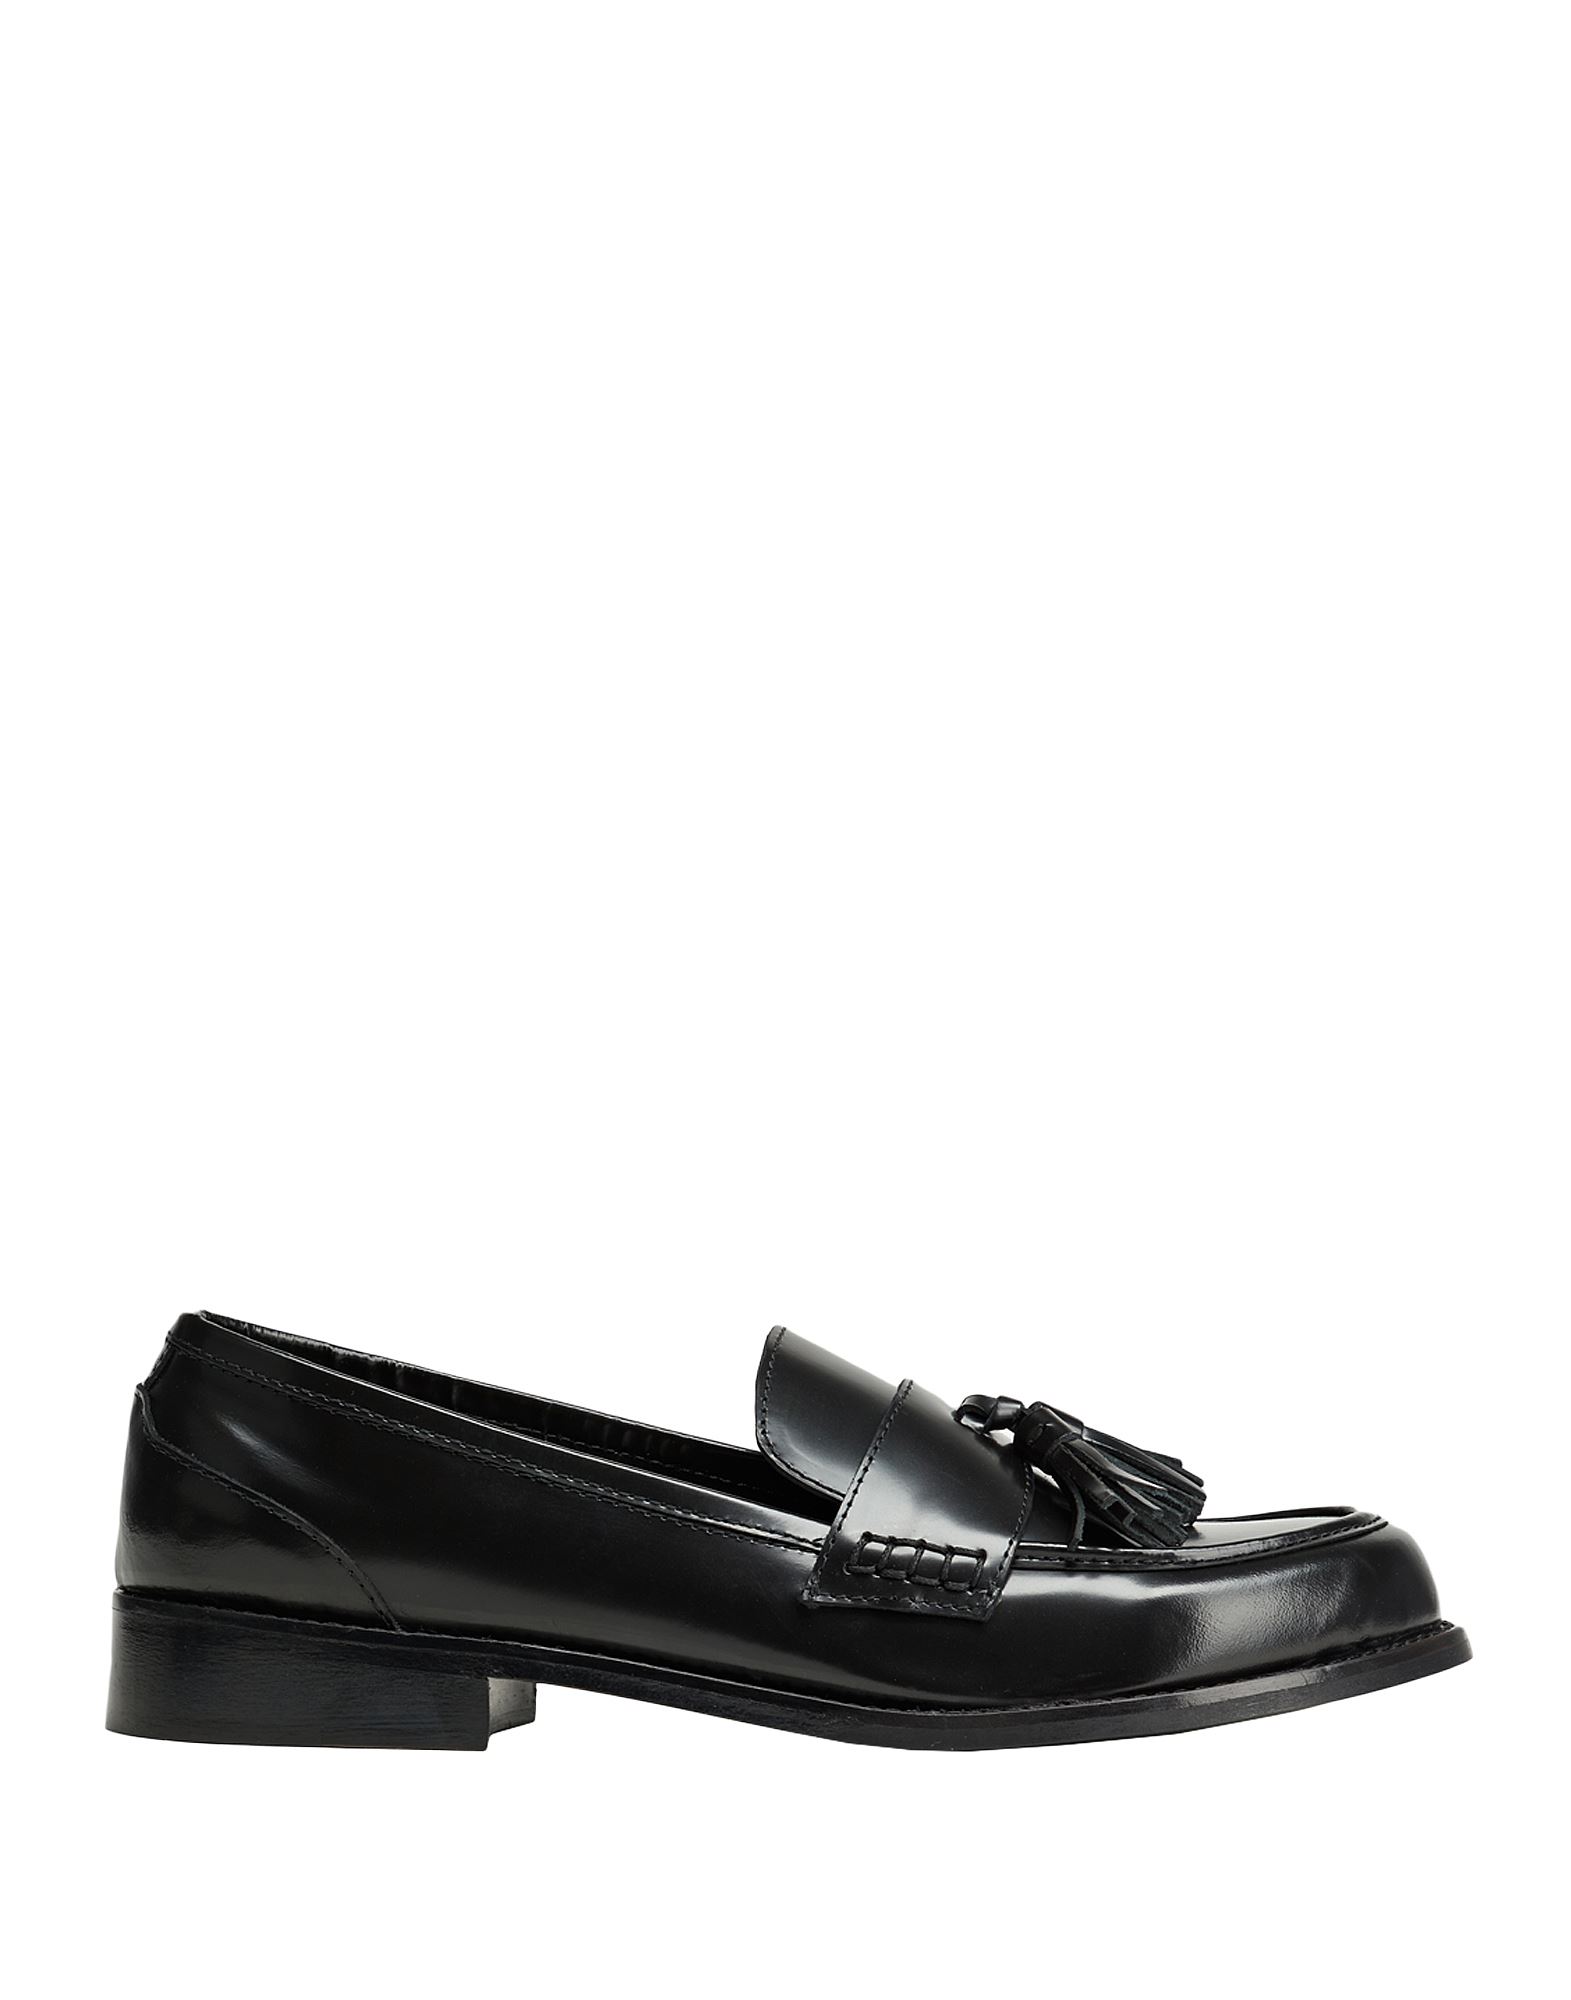 8 By Yoox Loafers In Black